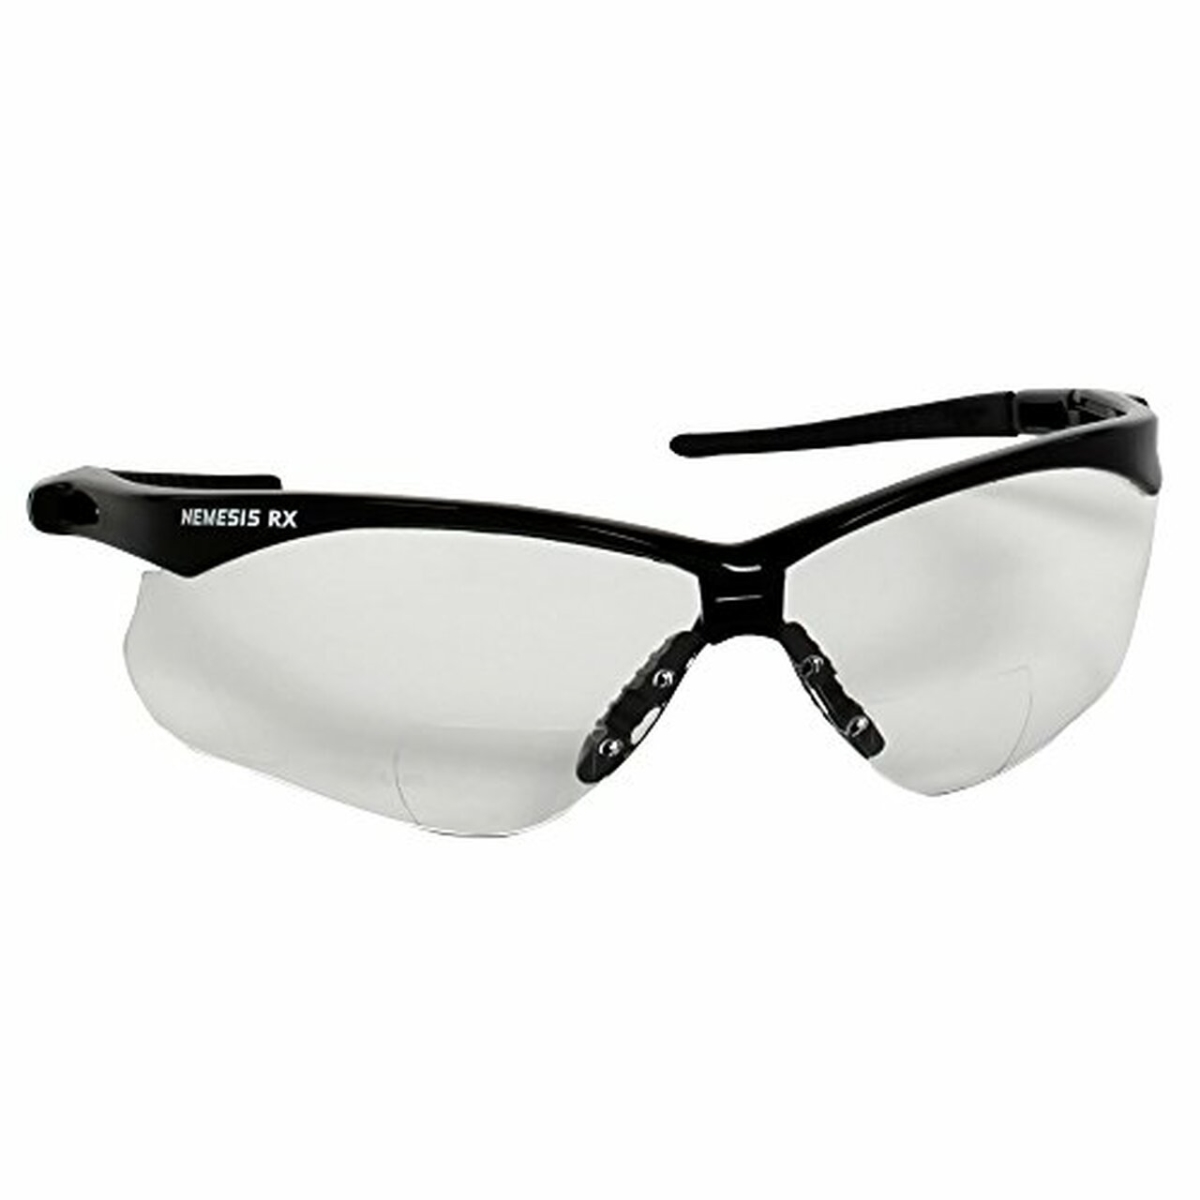 Picture of KleenGuard 412-28621 Nemesis RX 1.50 Diopter Safety Glasses, Black